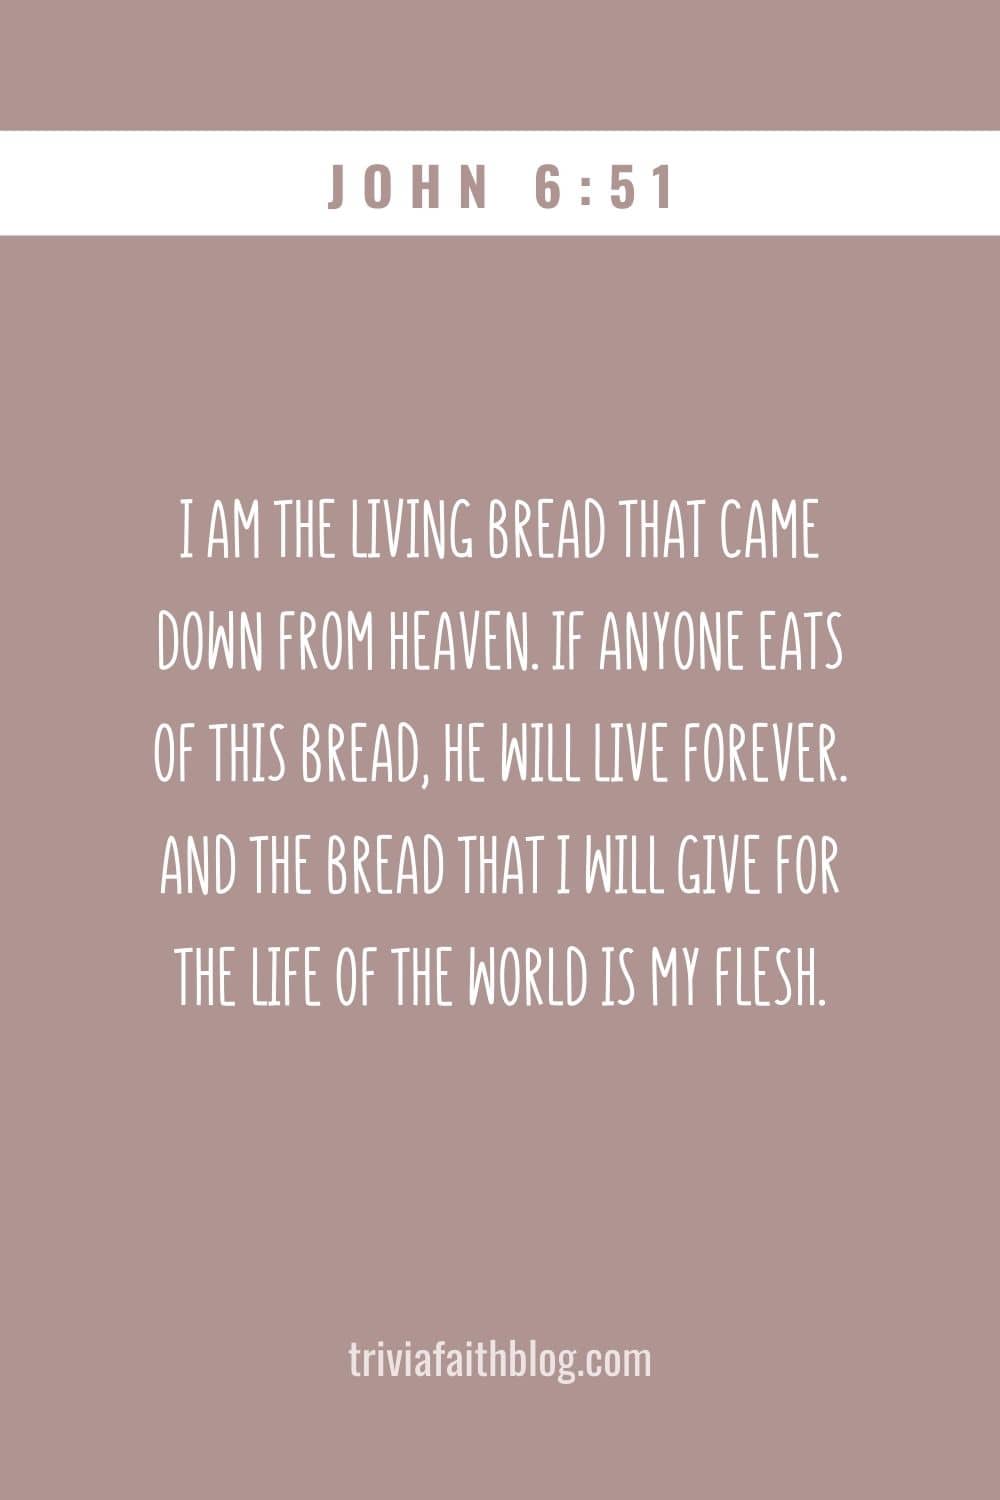 I am the living bread that came down from heaven